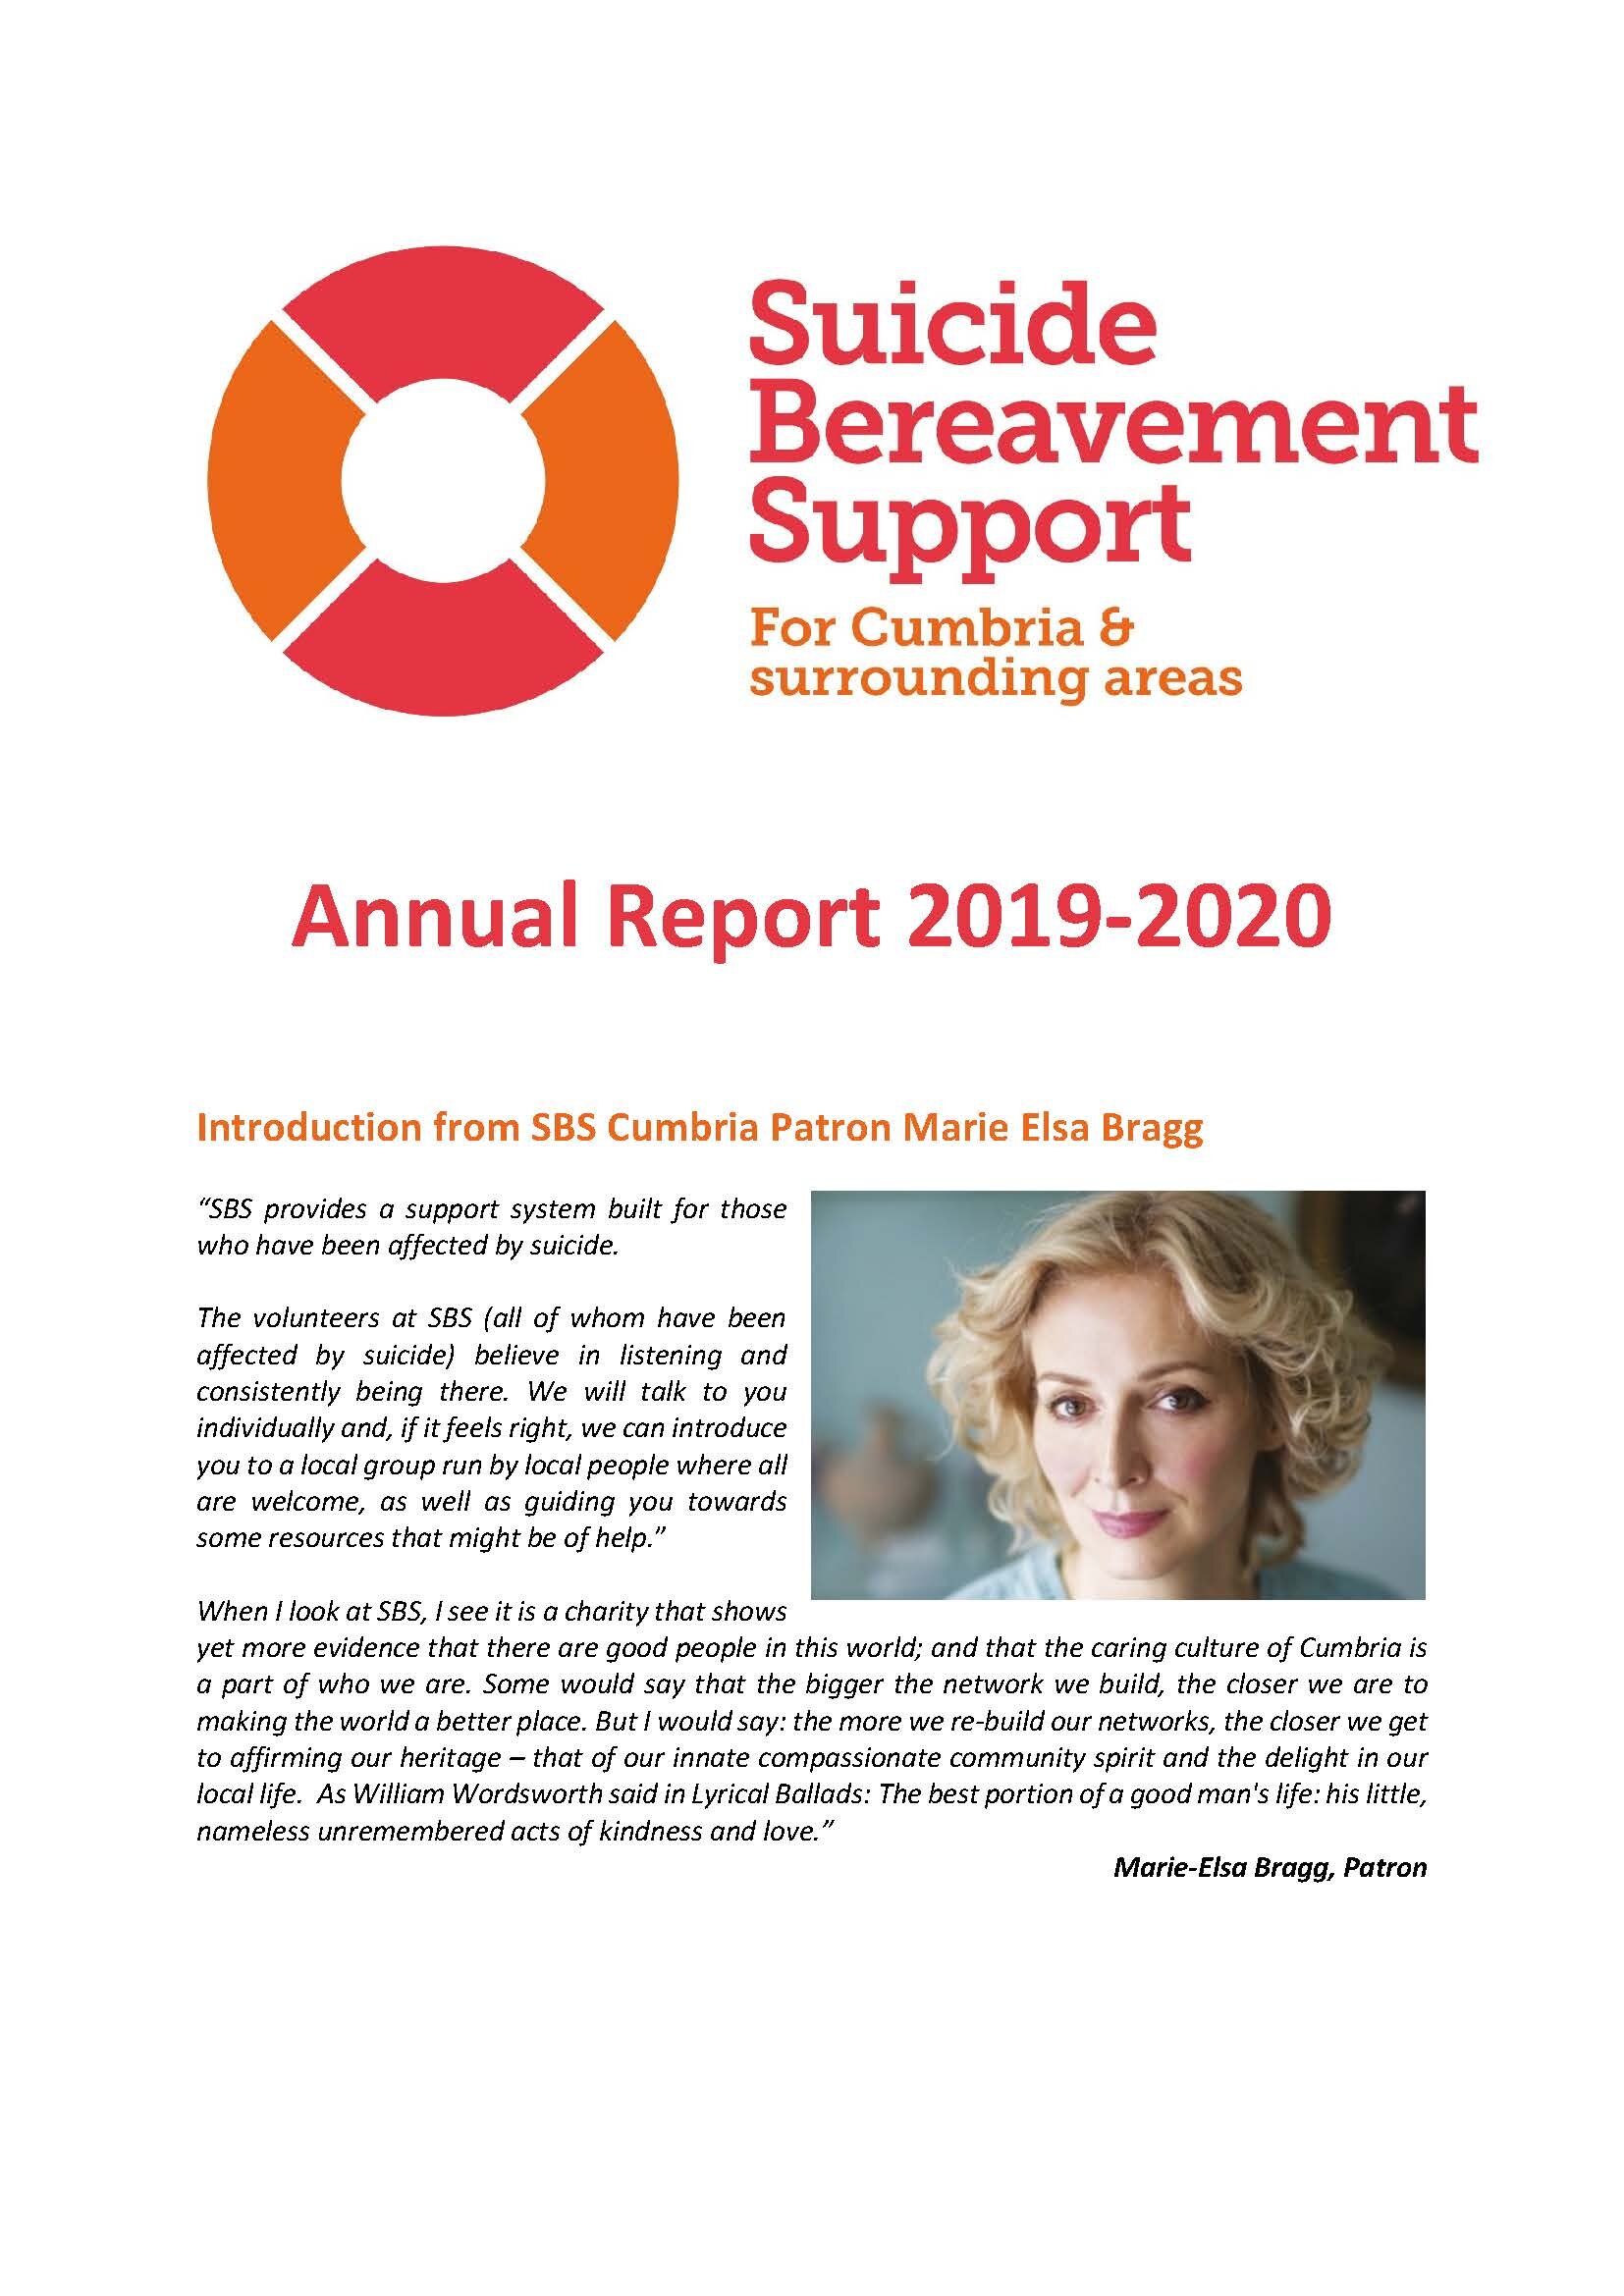 SBS Cumbria Annual Report 2019-2020_Page_01.jpg